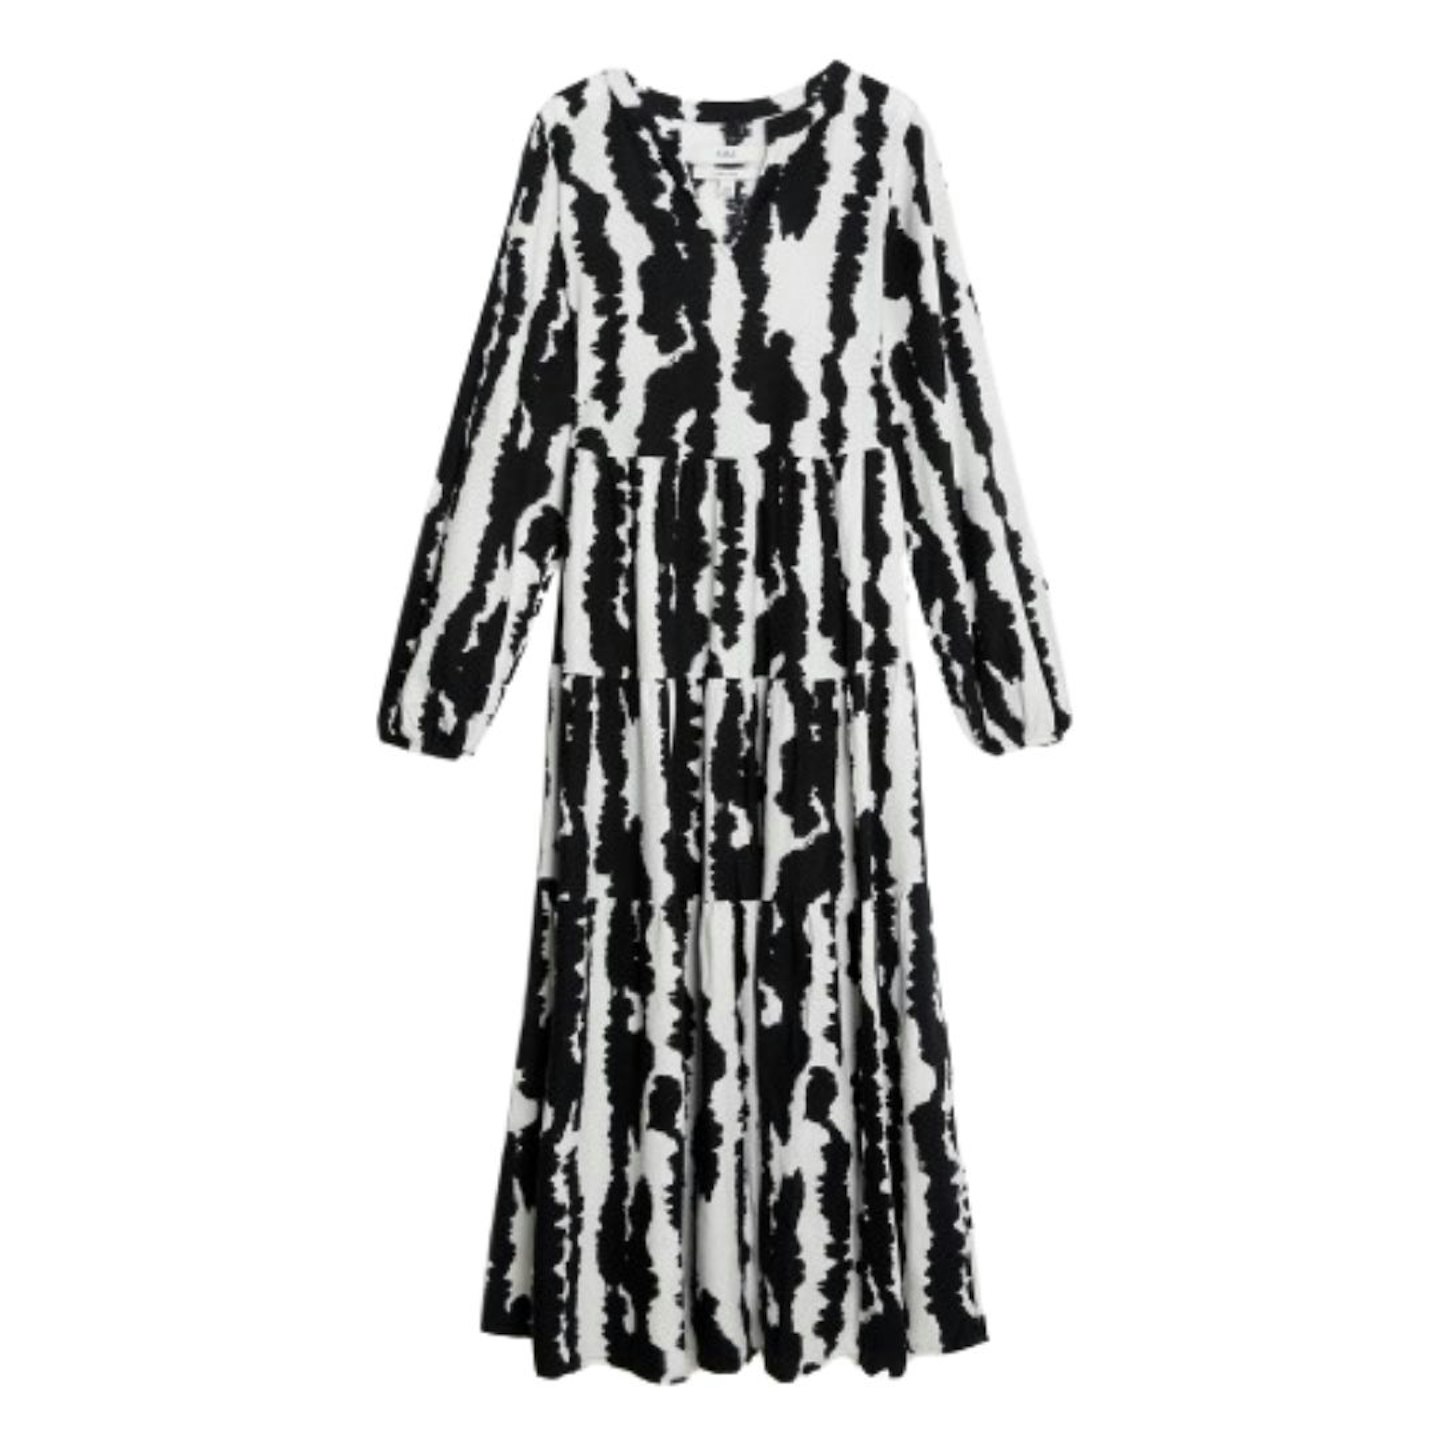 The best Marks and Spencer dresses: Linen Rich Printed V-Neck Midaxi Dress